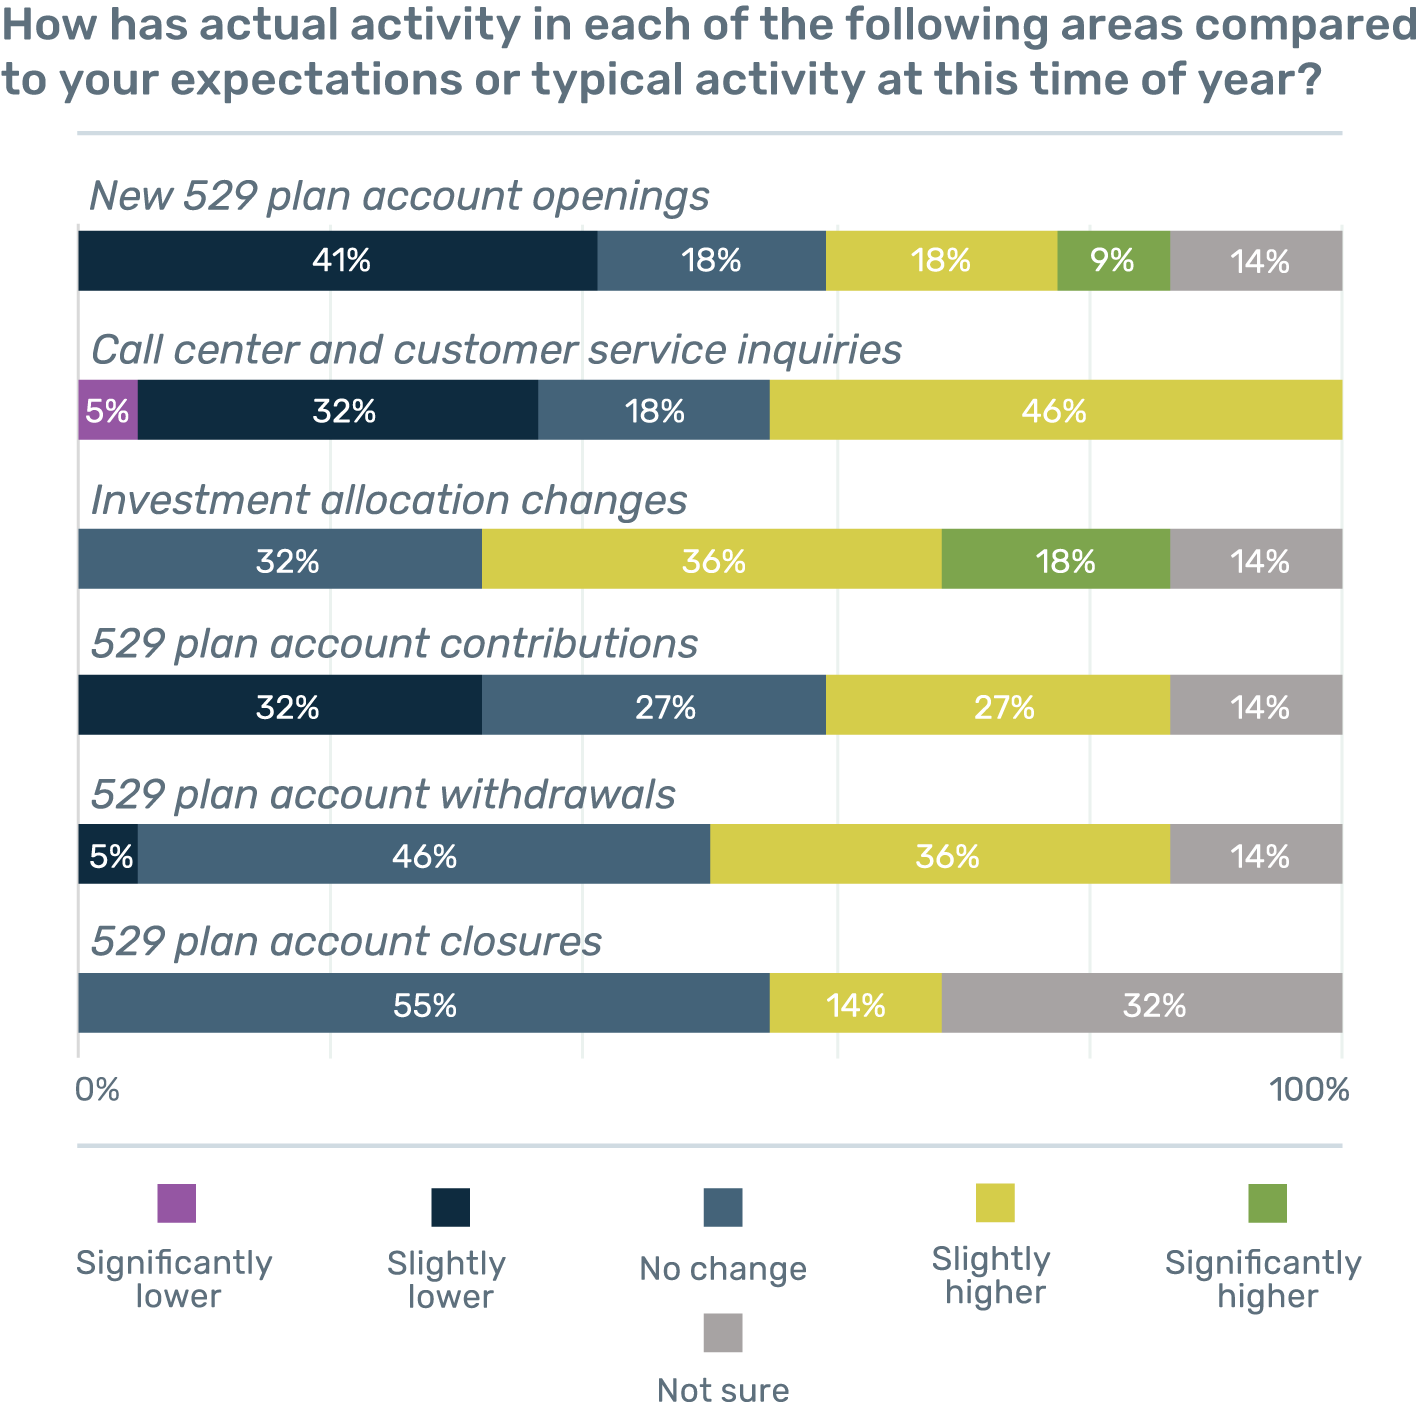 How has actual activity in each of the following areas compared to your expectations or typical activity at this time of year?